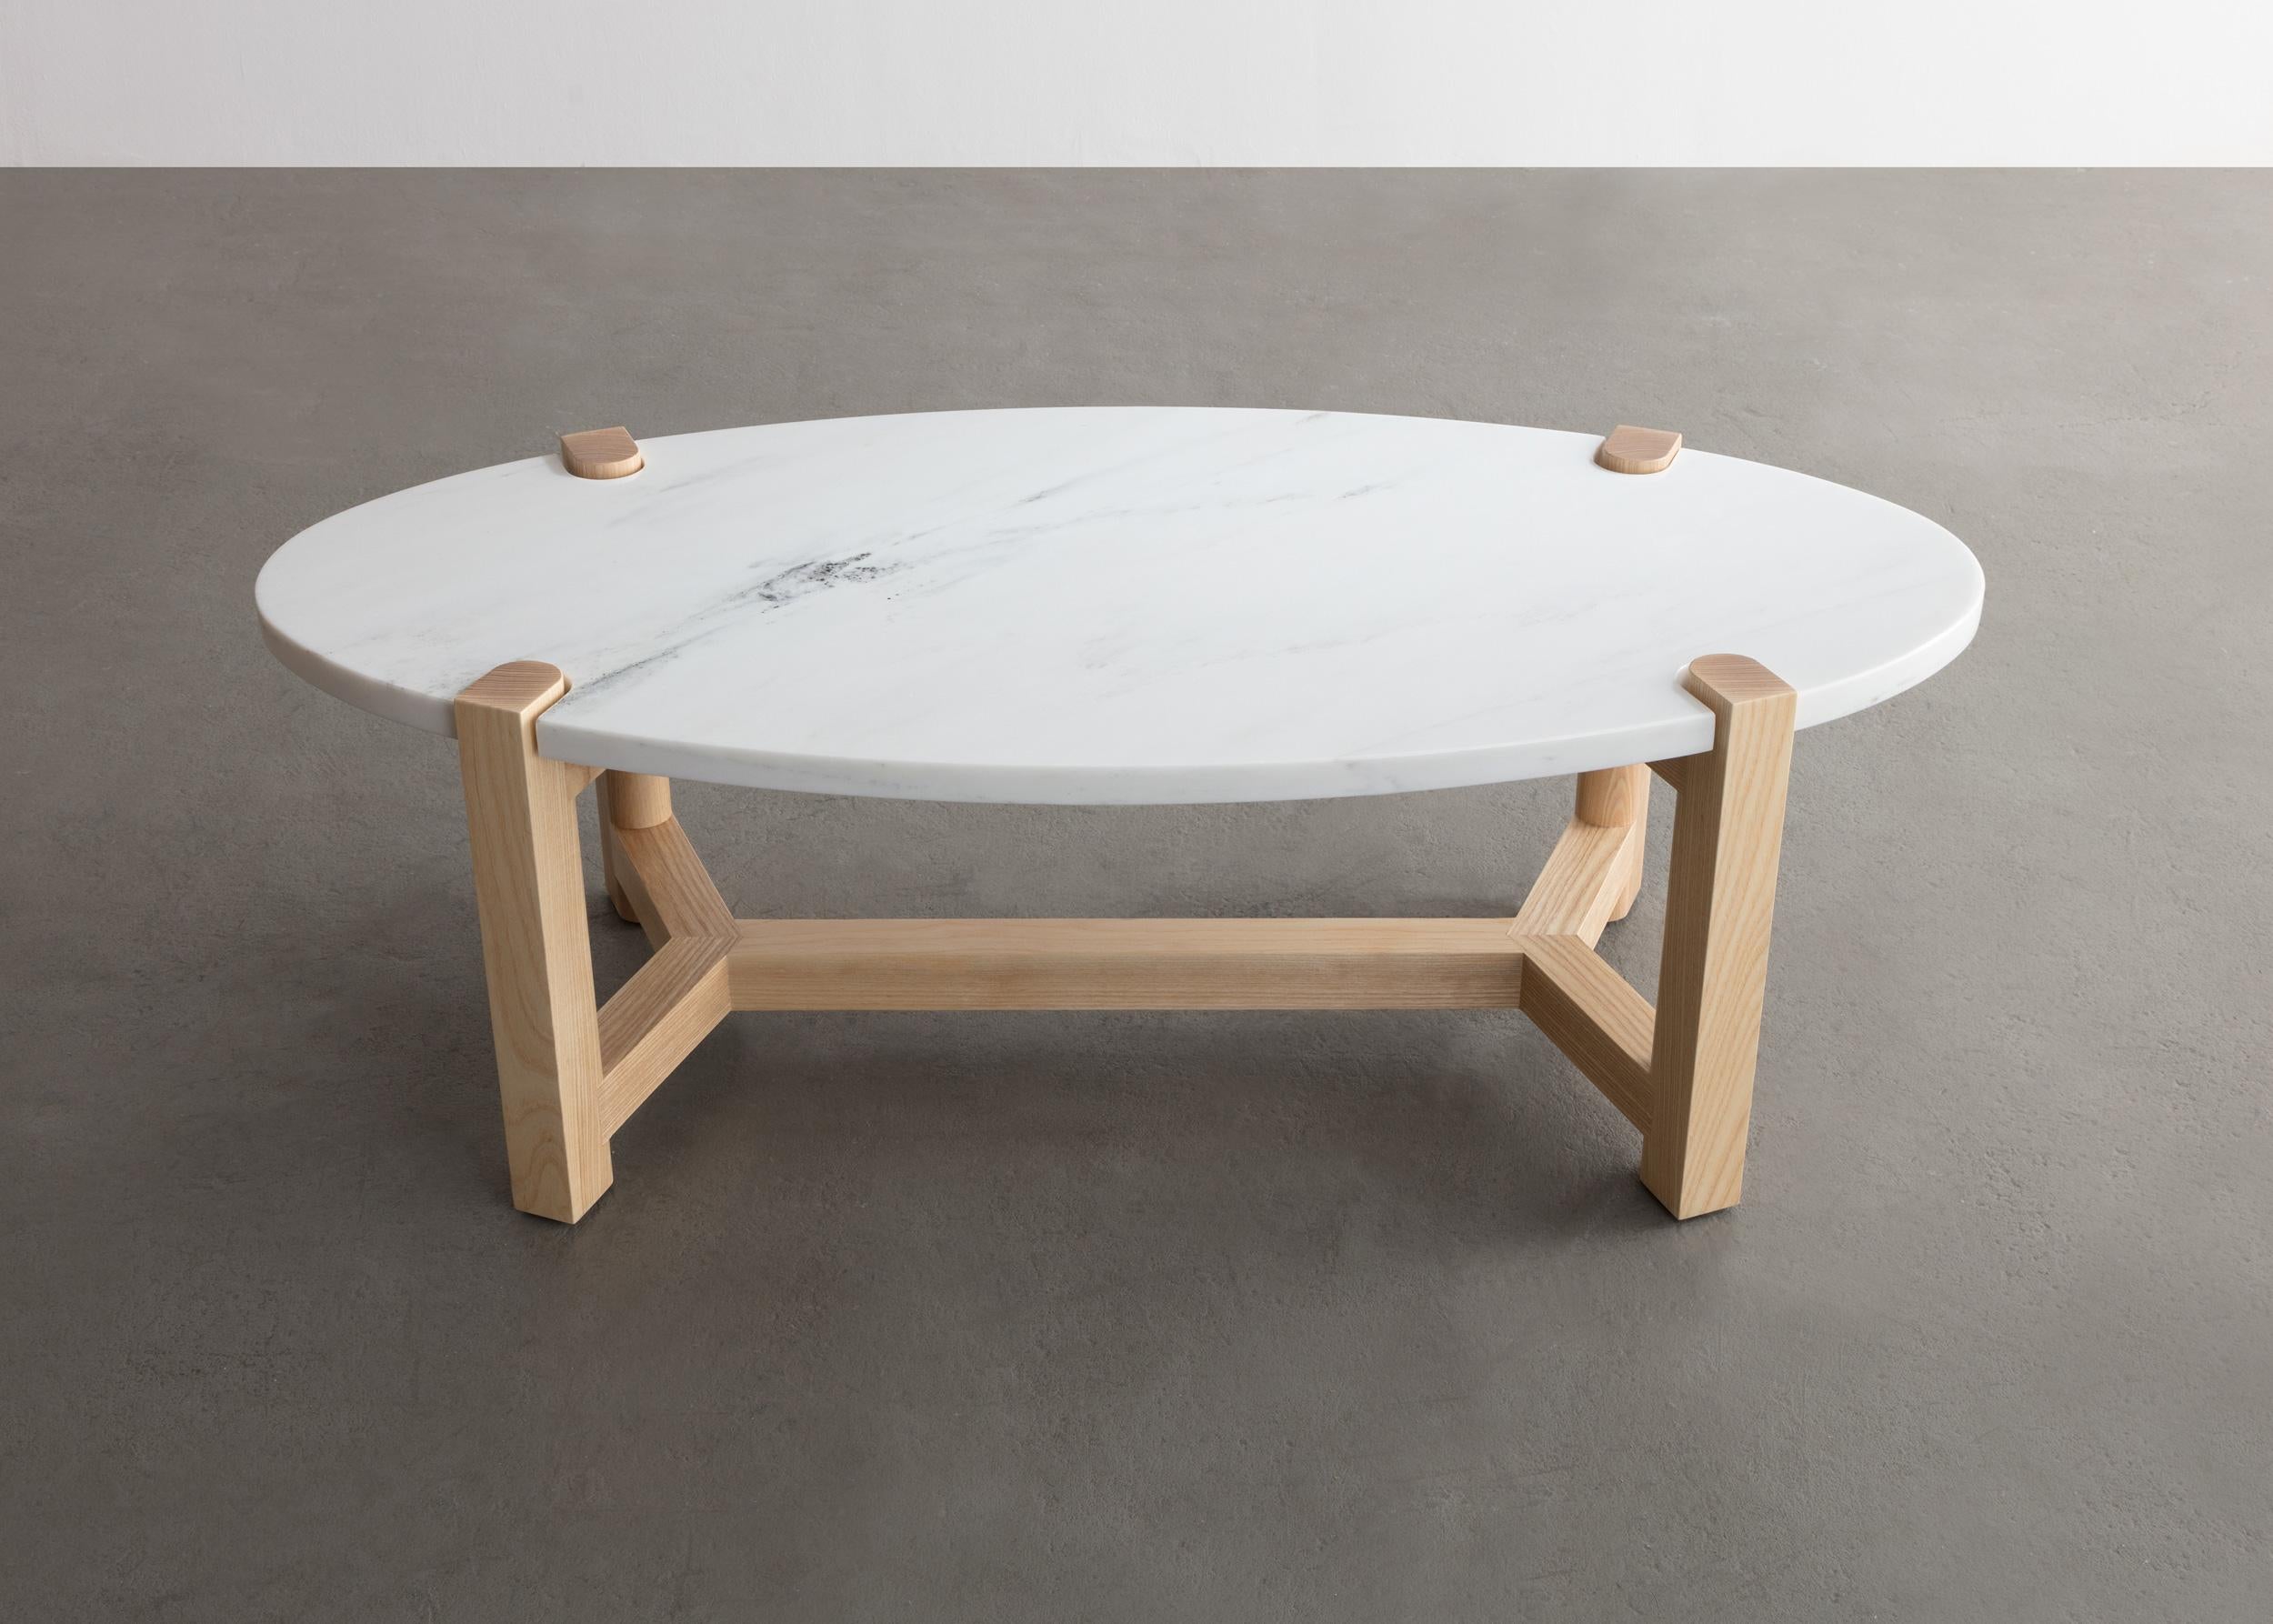 Hand-Crafted Pierce Coffee Table, Walnut, Carrara Marble or COS, Oval, Made in USA